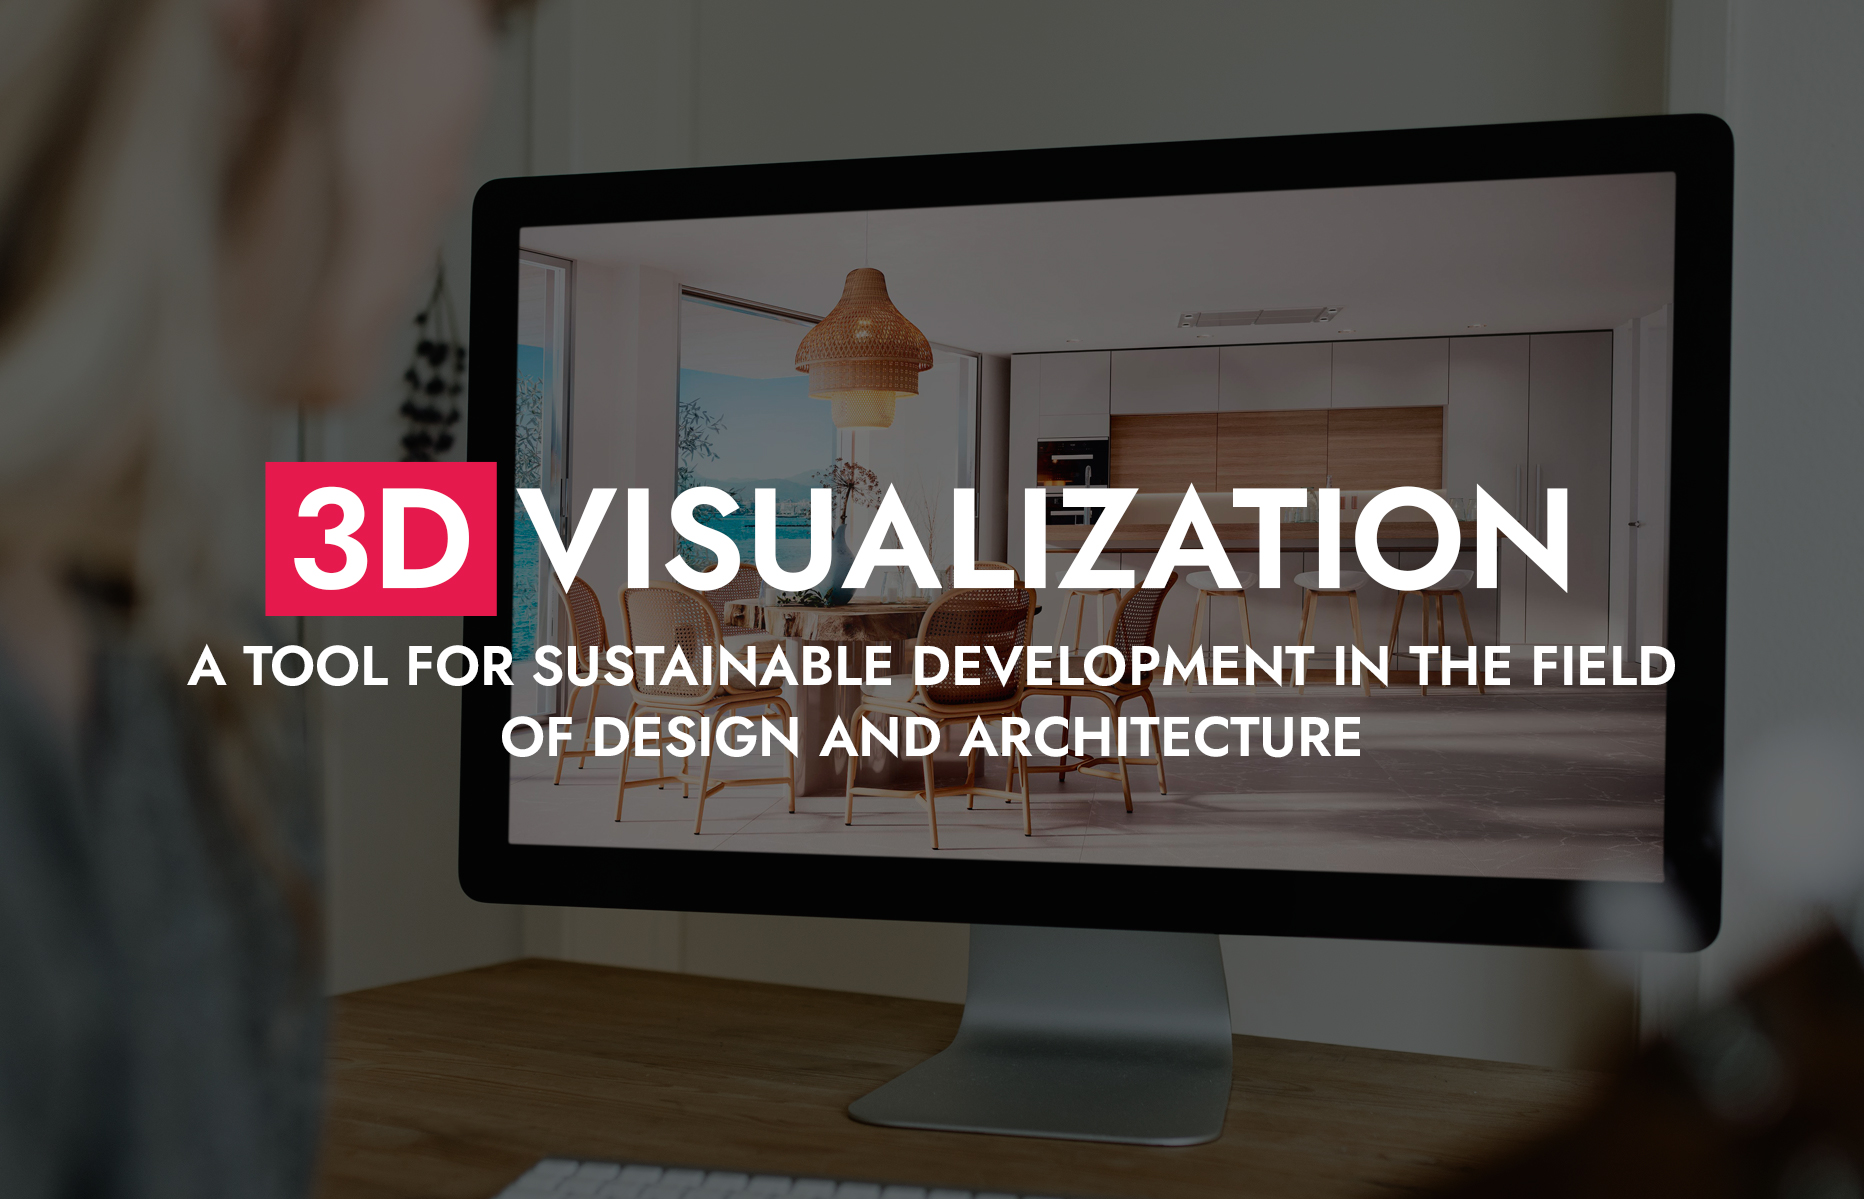 008 27 22 3D Visualization A Tool For Sustainable Development